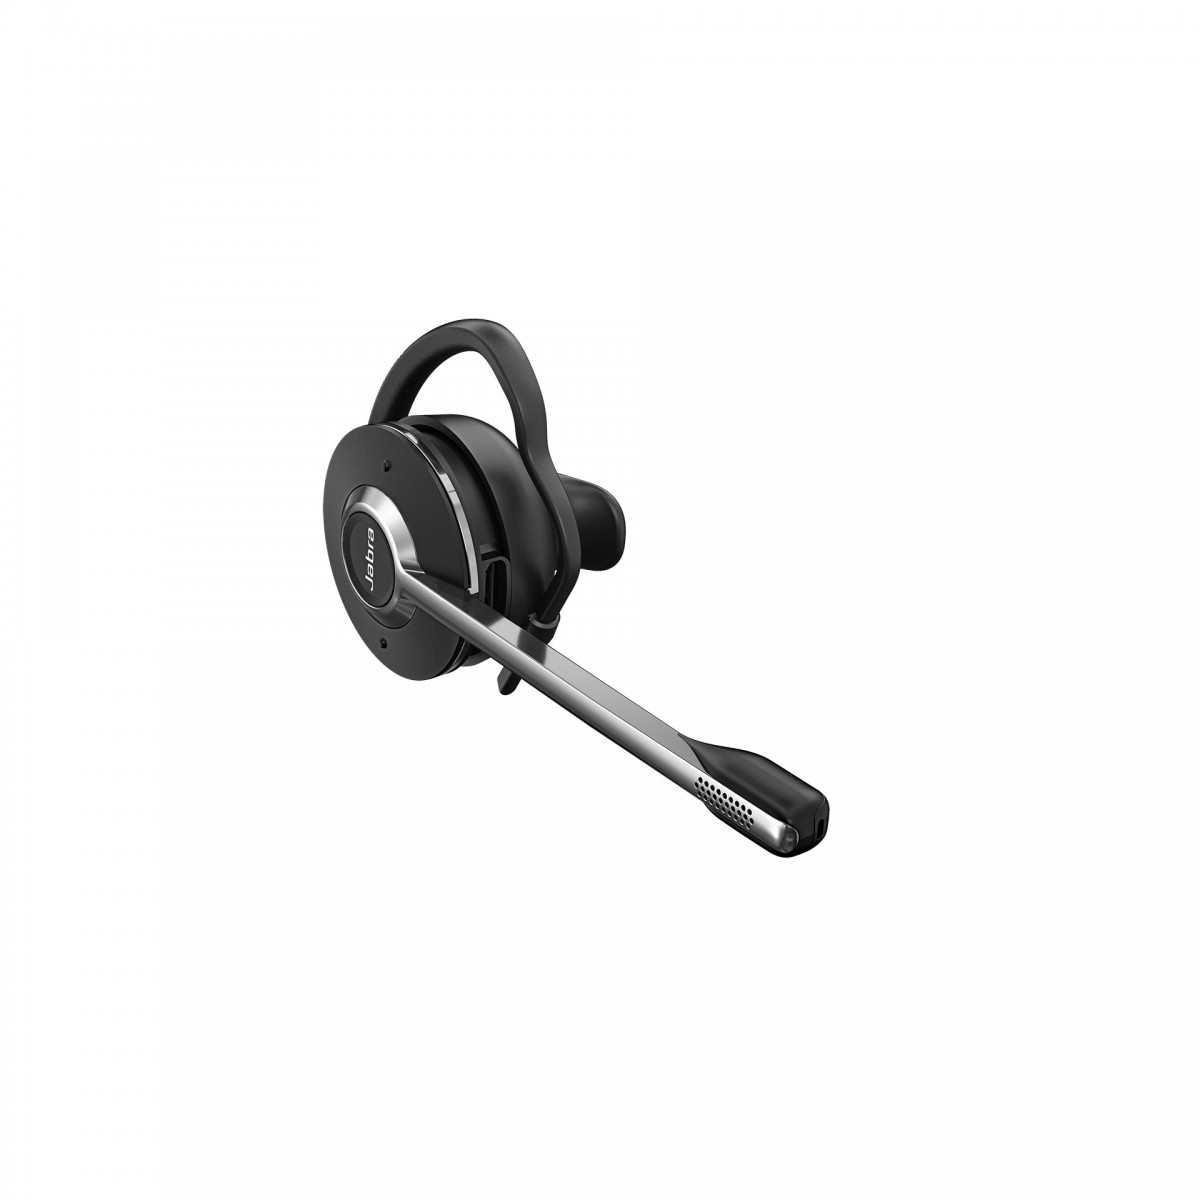 Jabra Engage 65 Convertible - Headset - Ear-hook - Head-band - Office/Call center - Black - Monaural - Reject call - Answer/end 